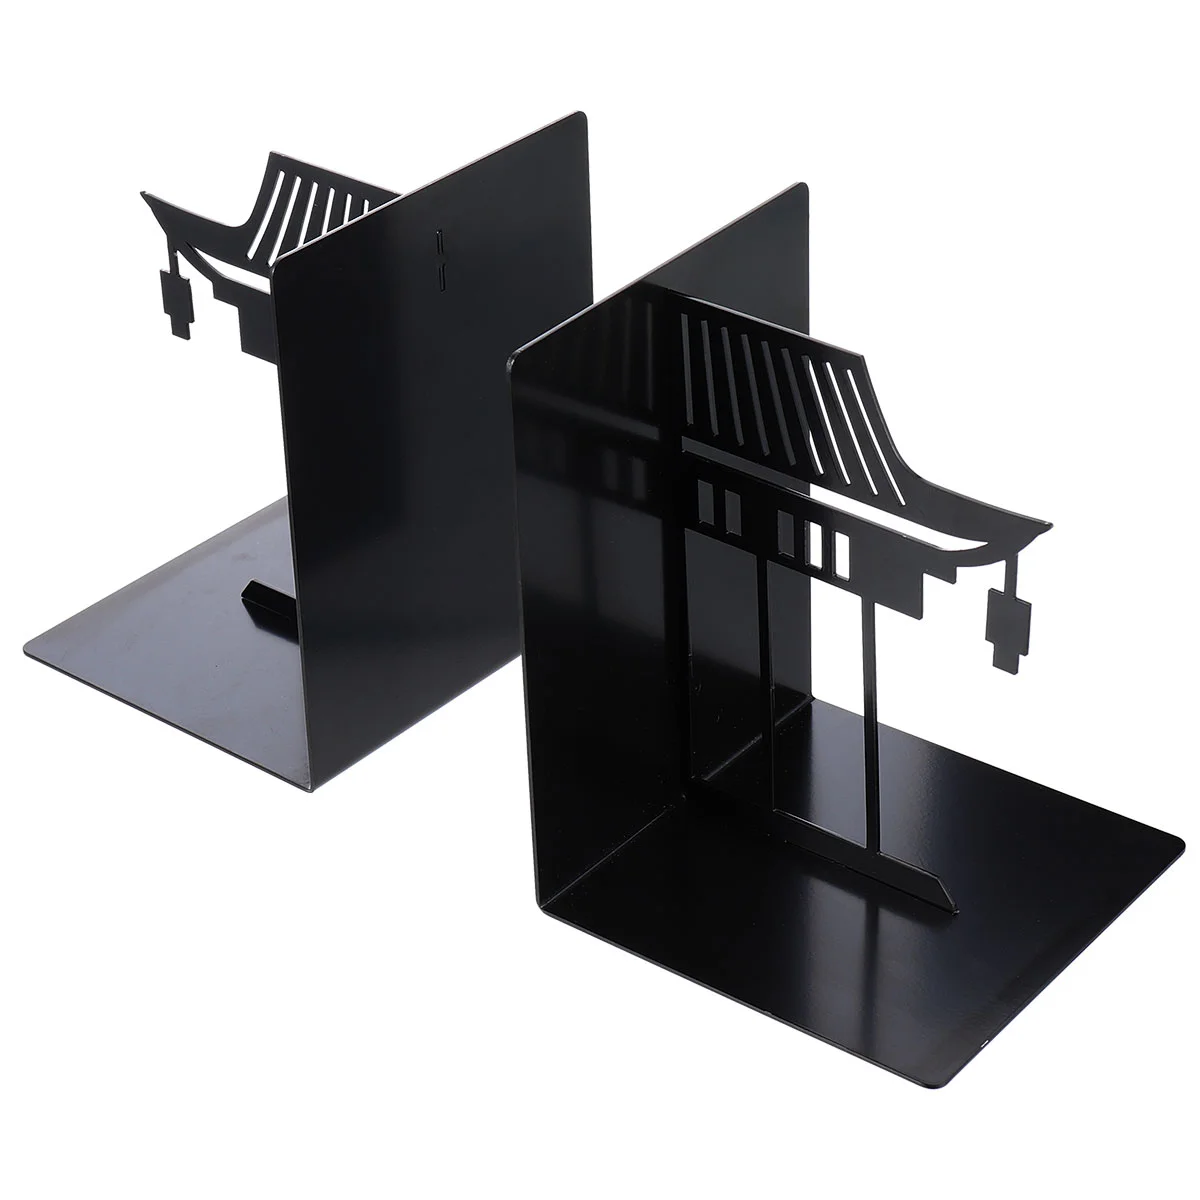 

Book Bookends Metal Bookend Stand Bookshelf Ends Stopper Building Desk Organizer Skid Non Shelves Supports Decorative Luxury